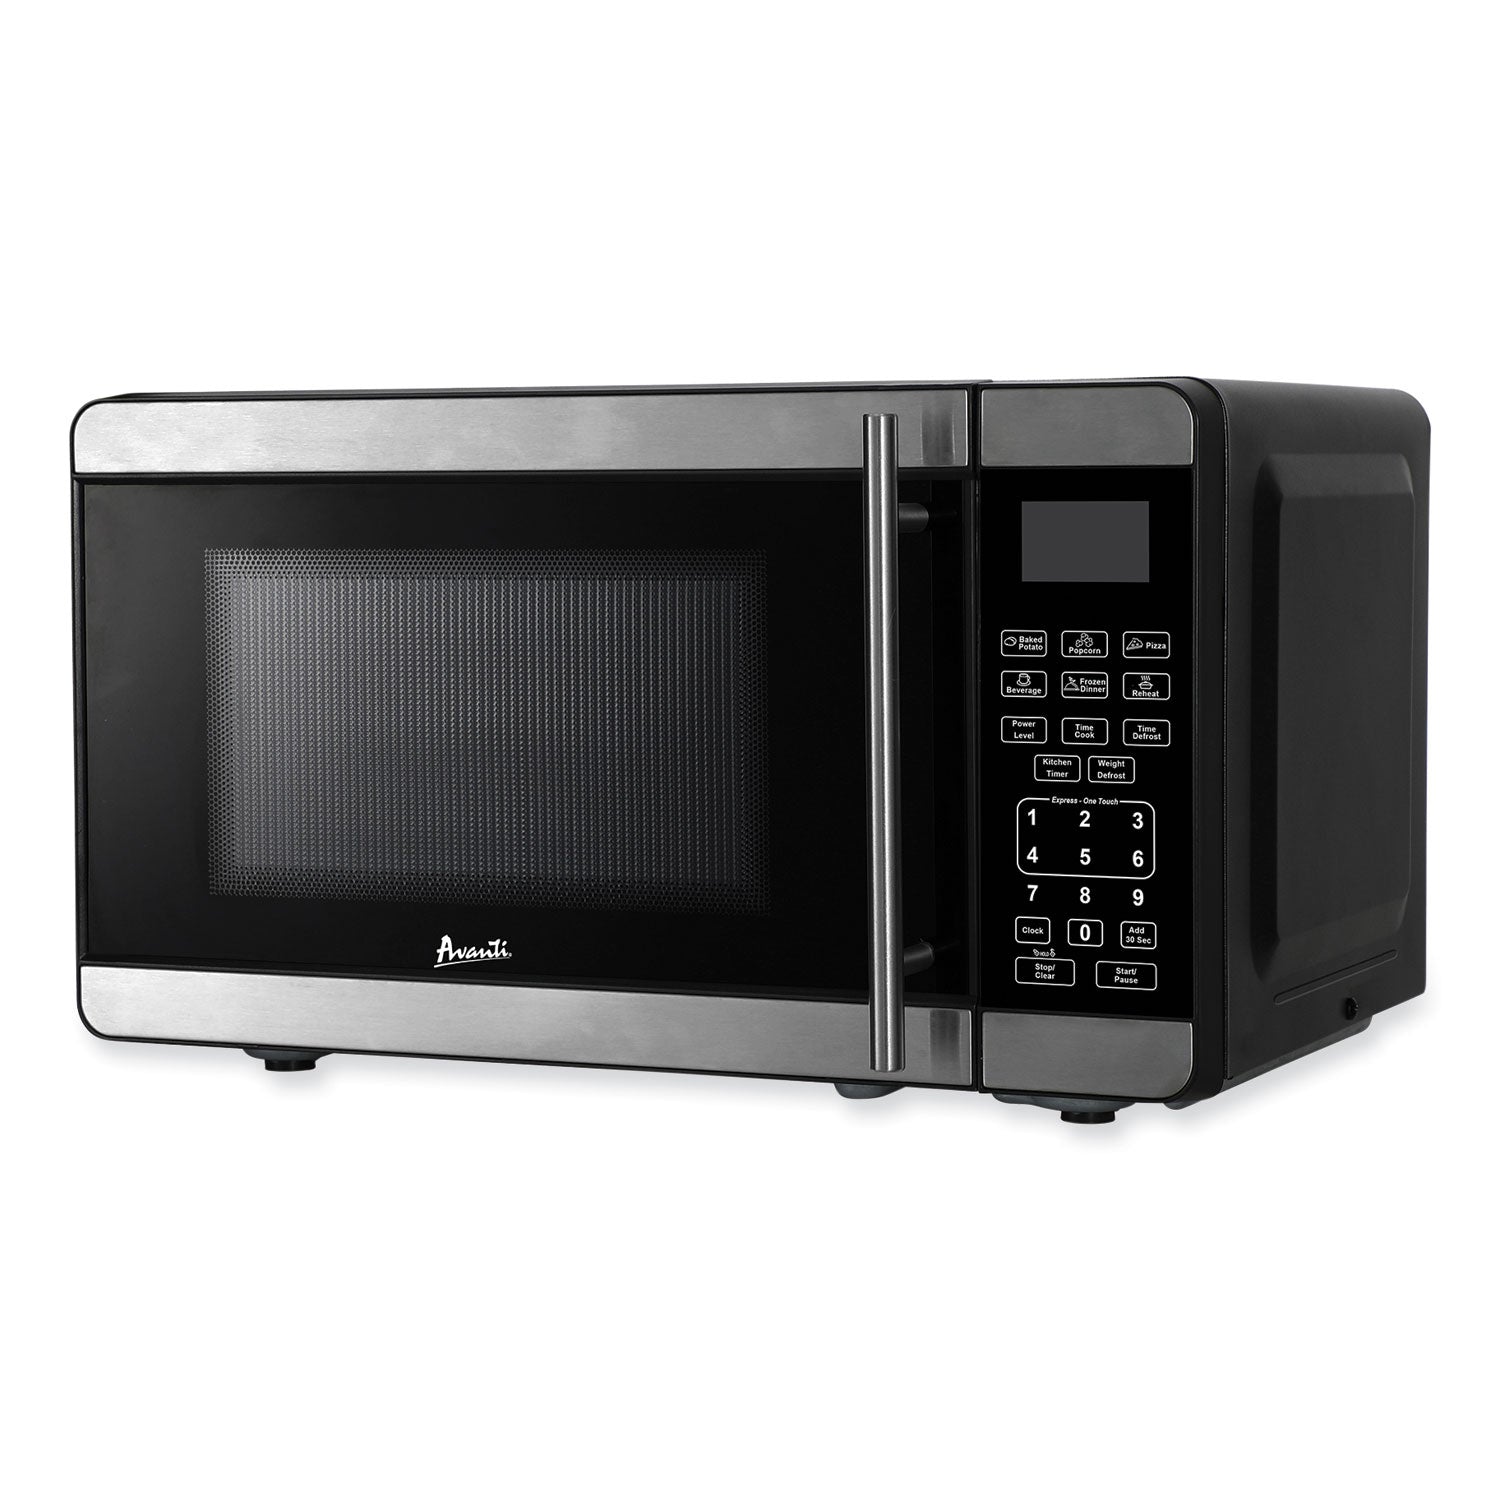 07-cubic-foot-microwave-oven-700-watts-stainless-steel-black_avamt7v3s - 1